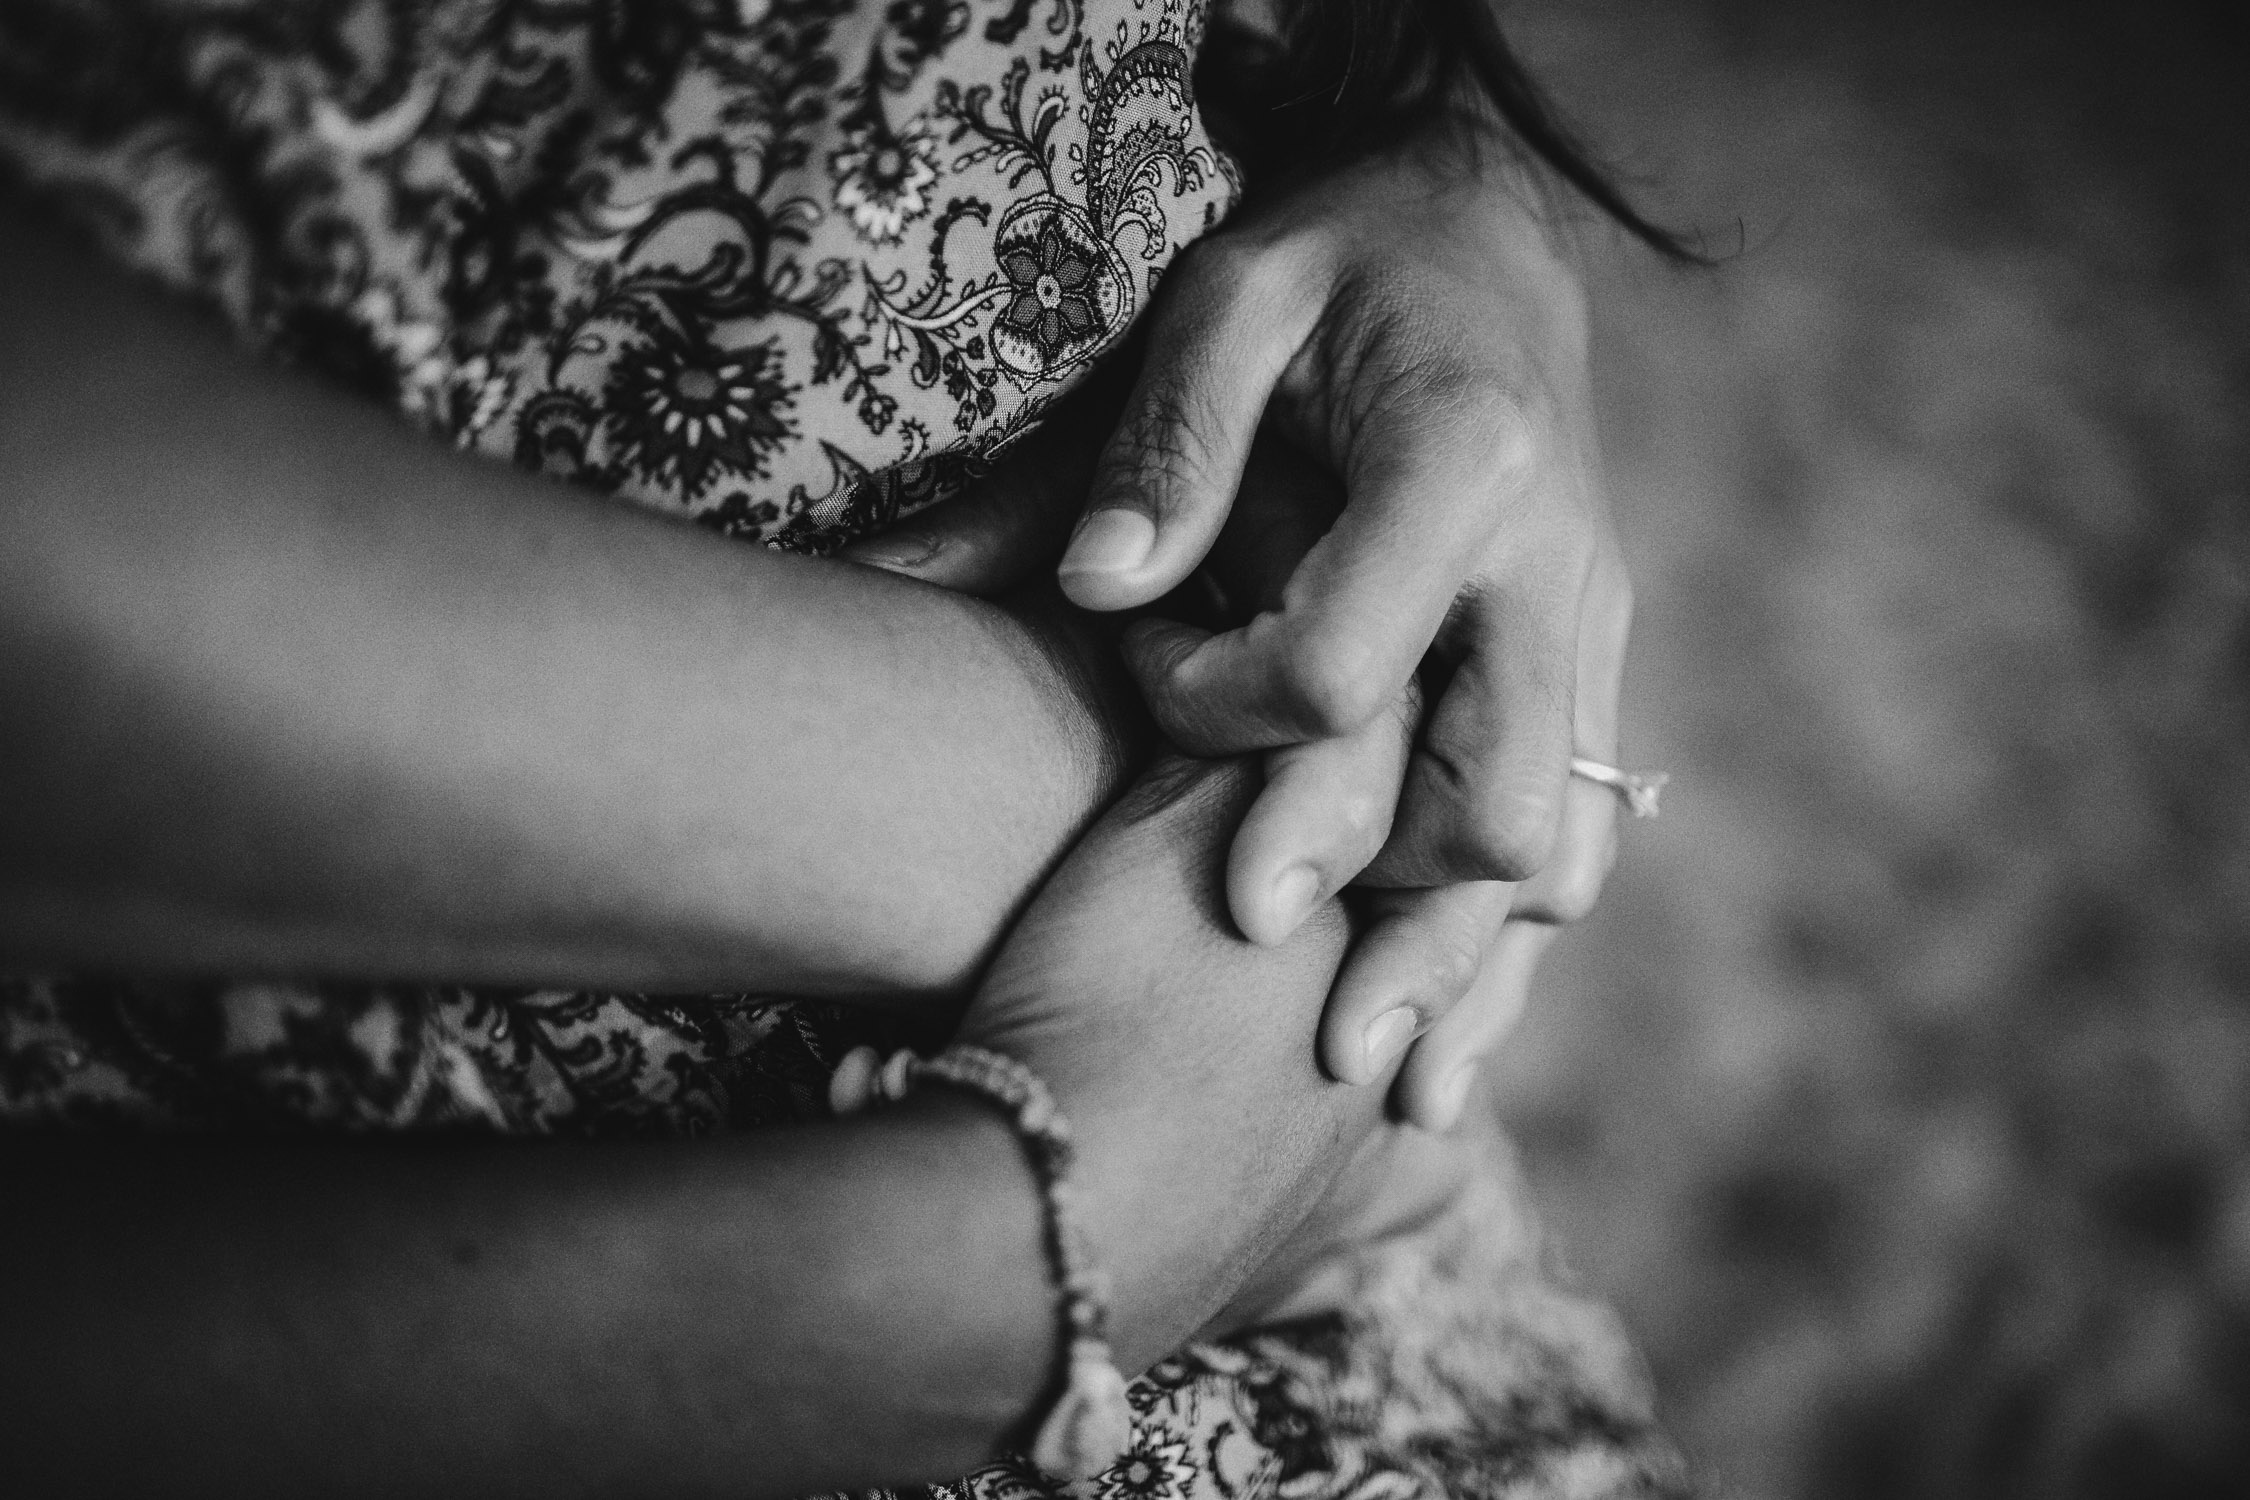 Hands overlapping with engagement ring showing during Kauai engagement photoshoot by Liz Koston. 